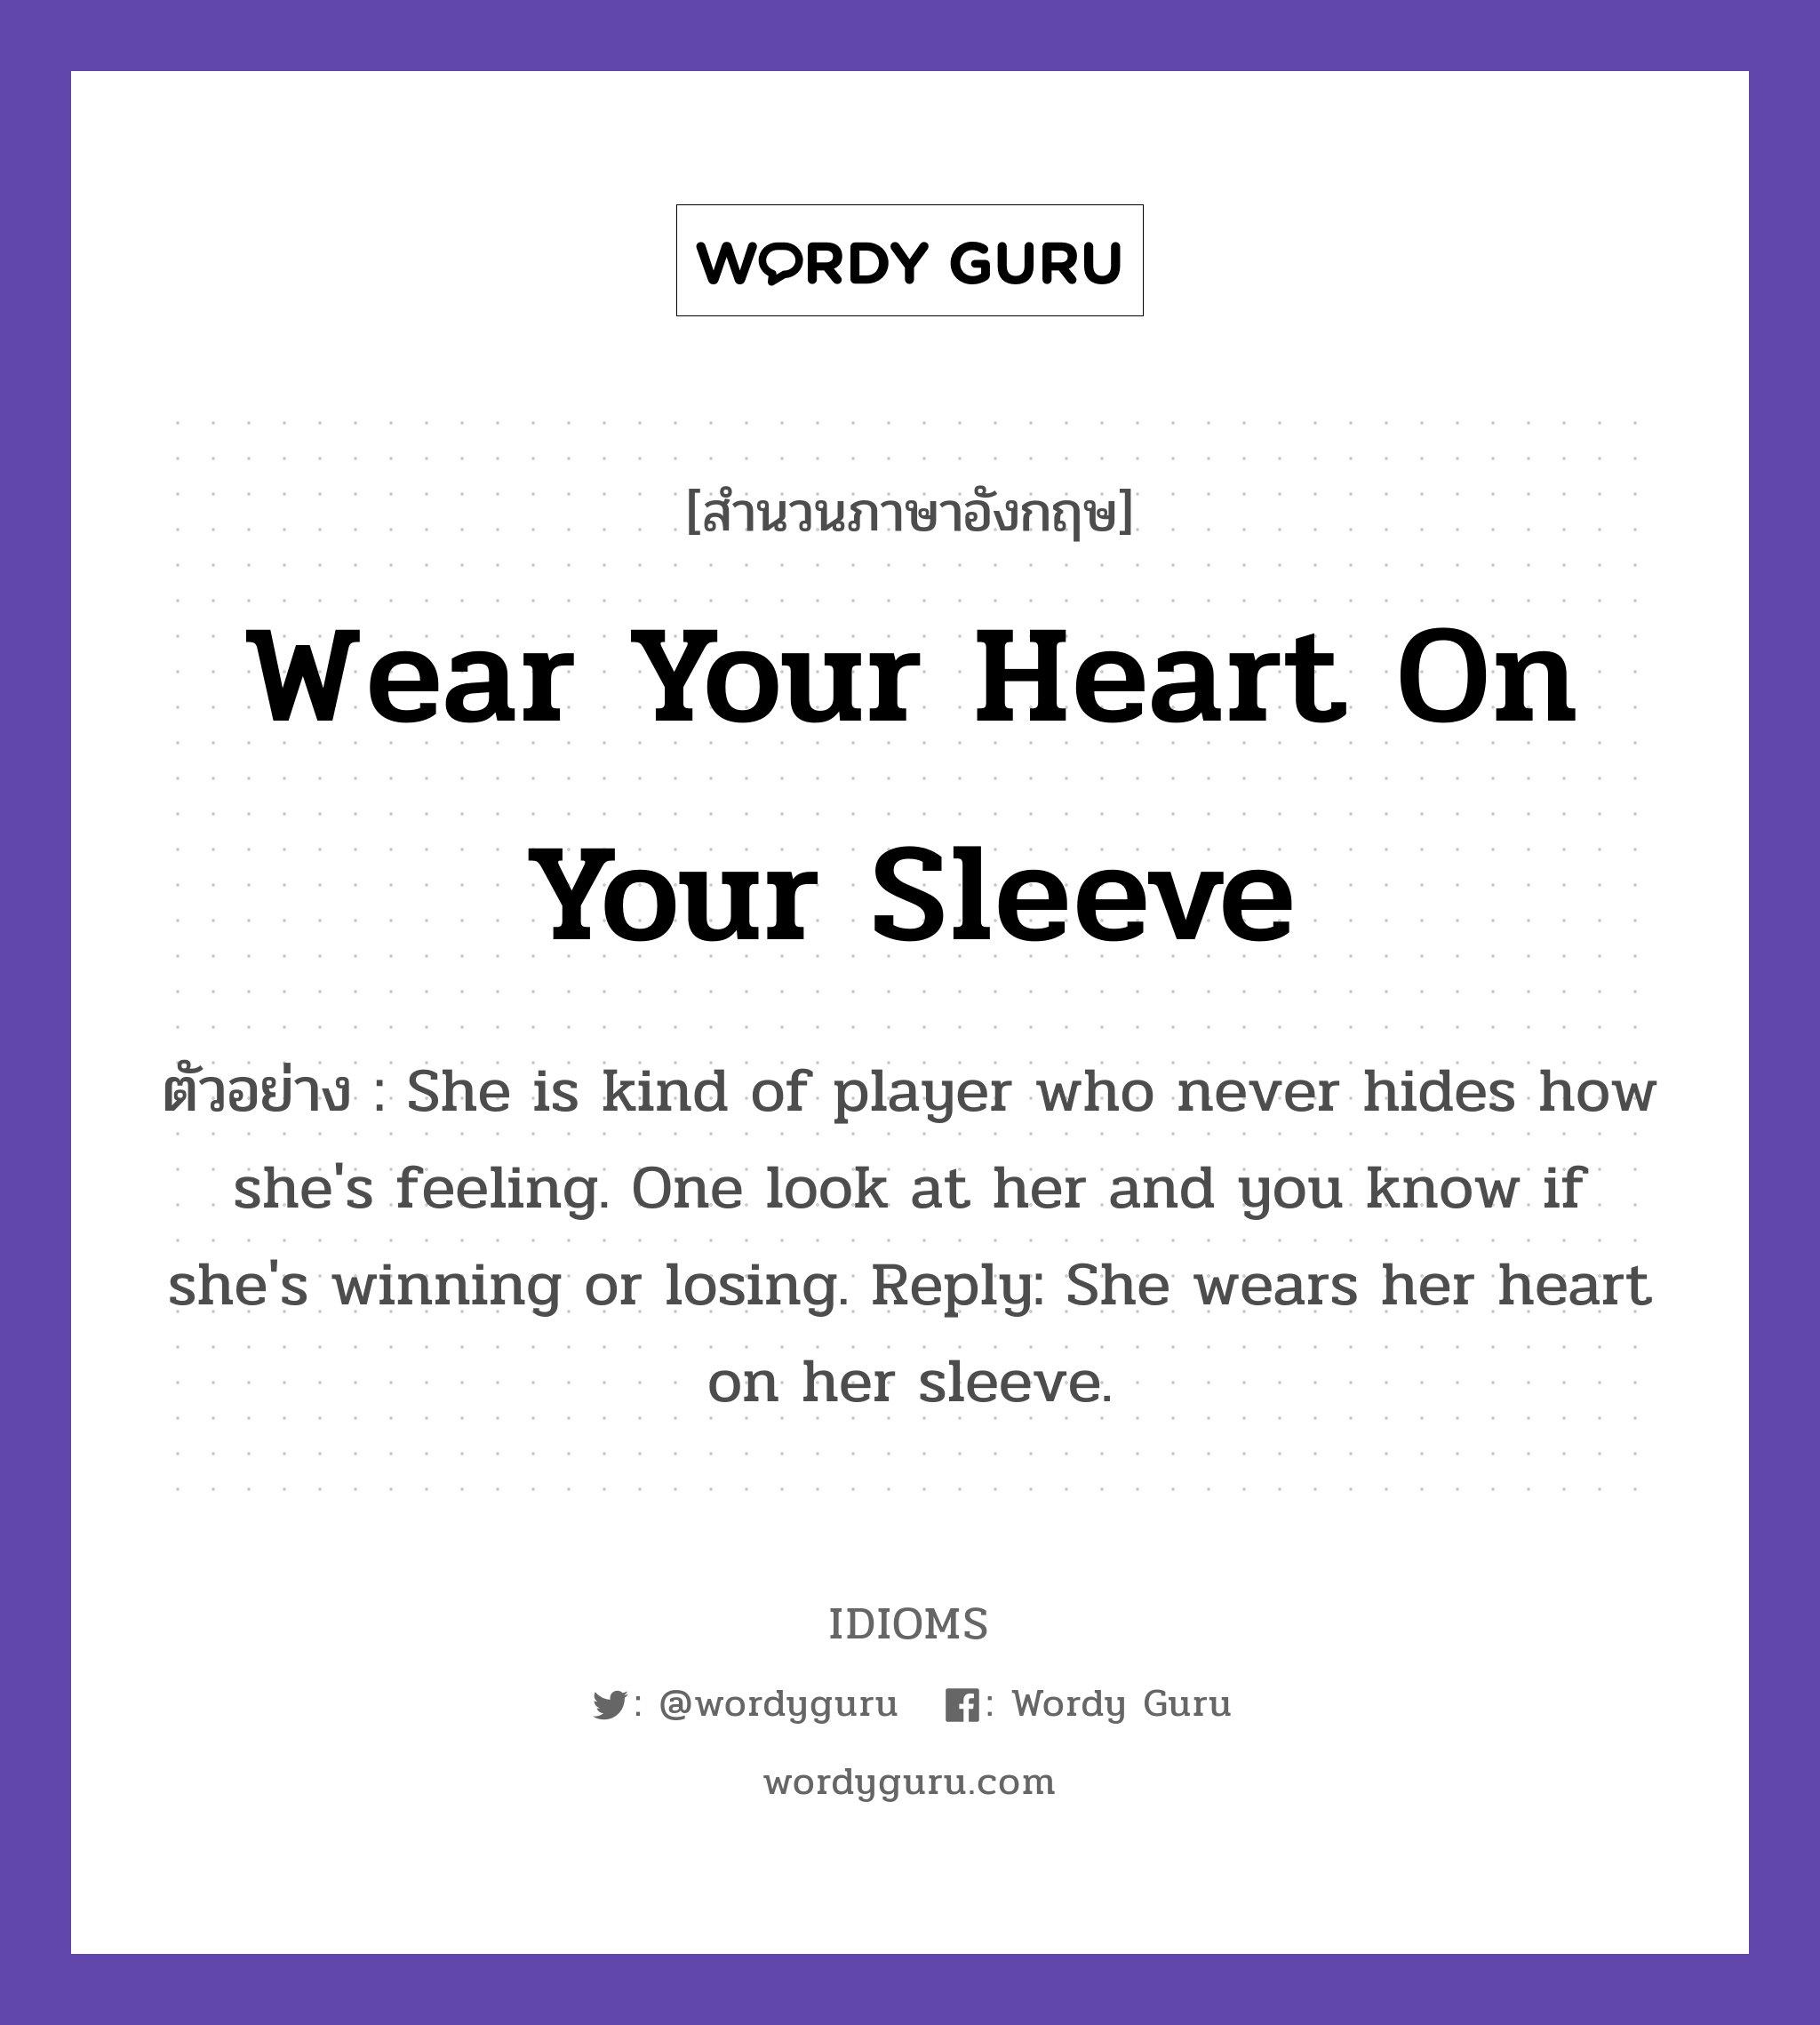 Wear Your Heart On Your Sleeve แปลว่า?, สำนวนภาษาอังกฤษ Wear Your Heart On Your Sleeve ตัวอย่าง She is kind of player who never hides how she's feeling. One look at her and you know if she's winning or losing. Reply: She wears her heart on her sleeve.